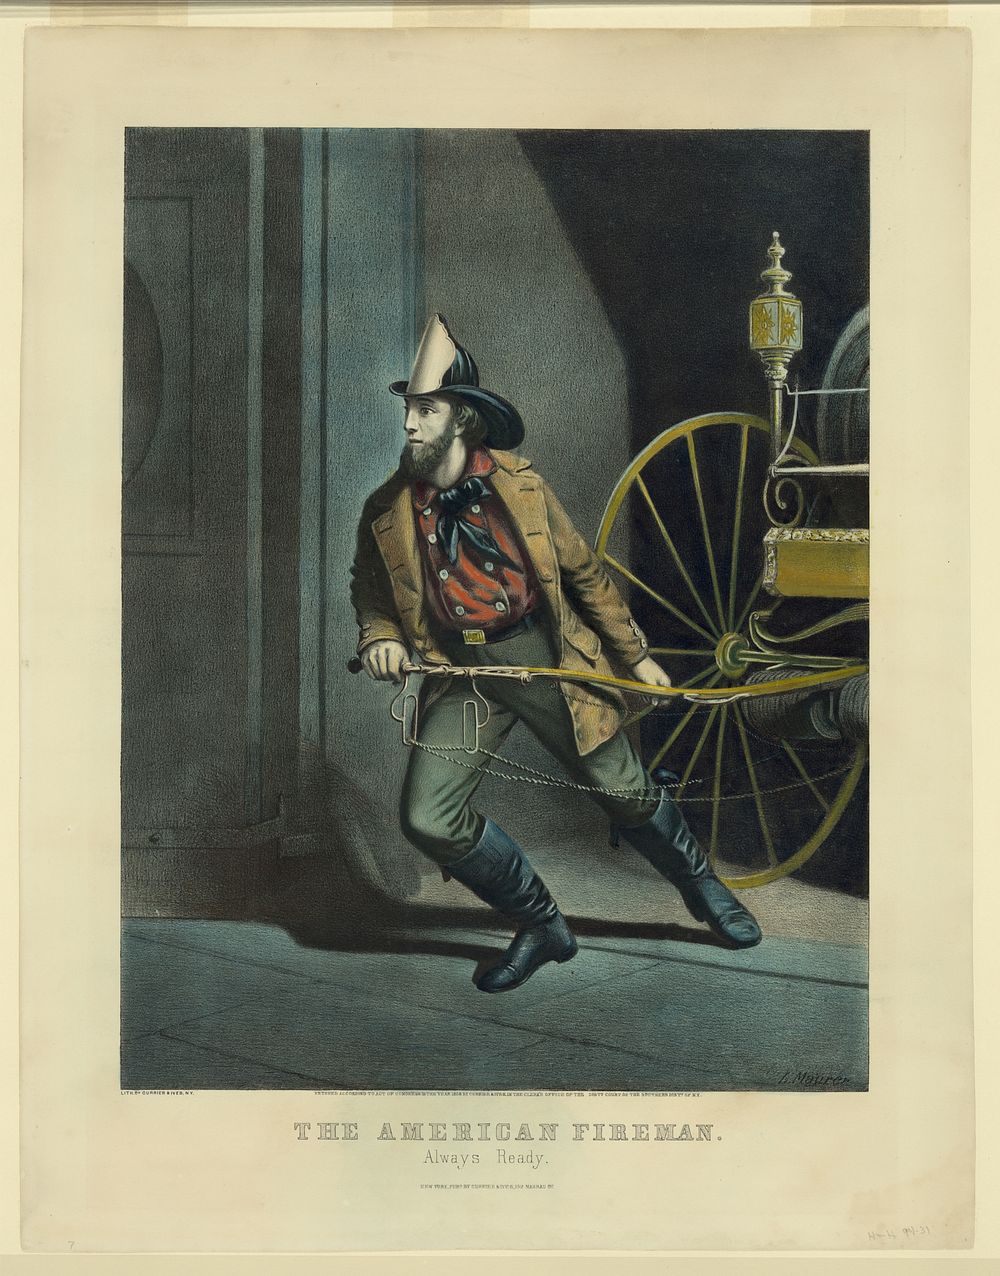 The American fireman - always ready (1858) by Currier & Ives.